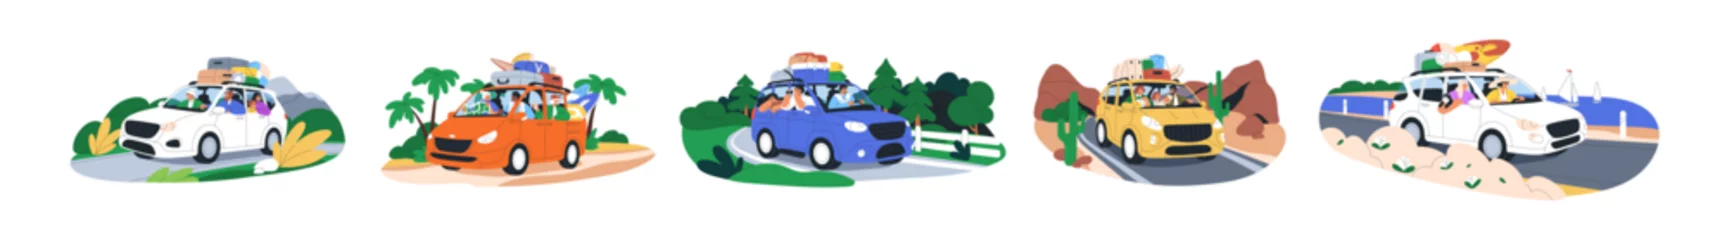 Fototapete Cartoon-Autos Happy families, friends travel by car, van. Road trip, journey on summer holiday set. People in auto adventure, driving to sea, nature at weekend. Flat vector illustration isolated on white background